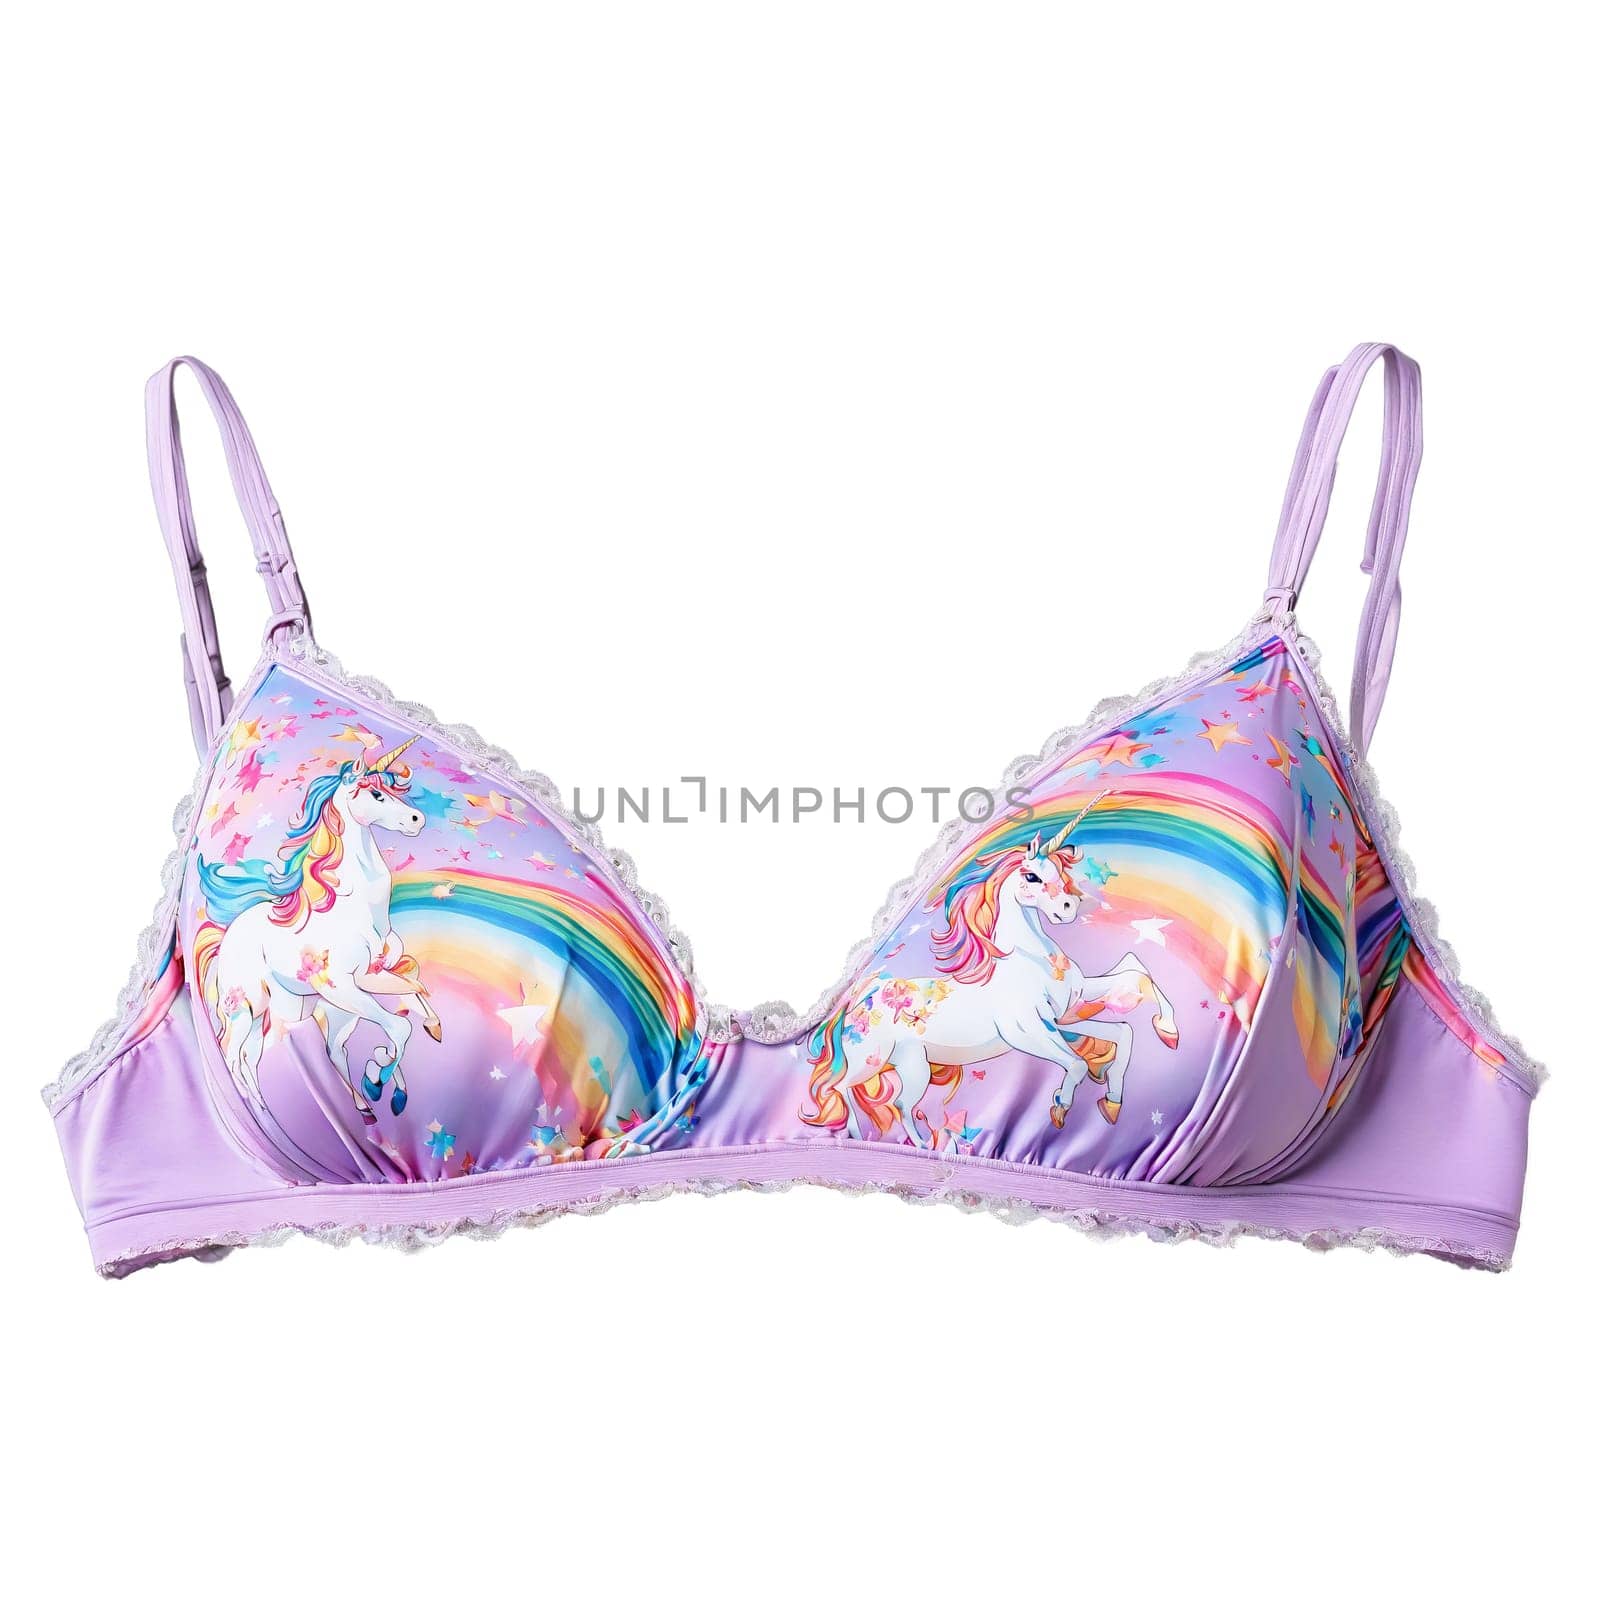 Whimsical unicorn print bralette prancing playfully pastel rainbow hues magical fancy by panophotograph